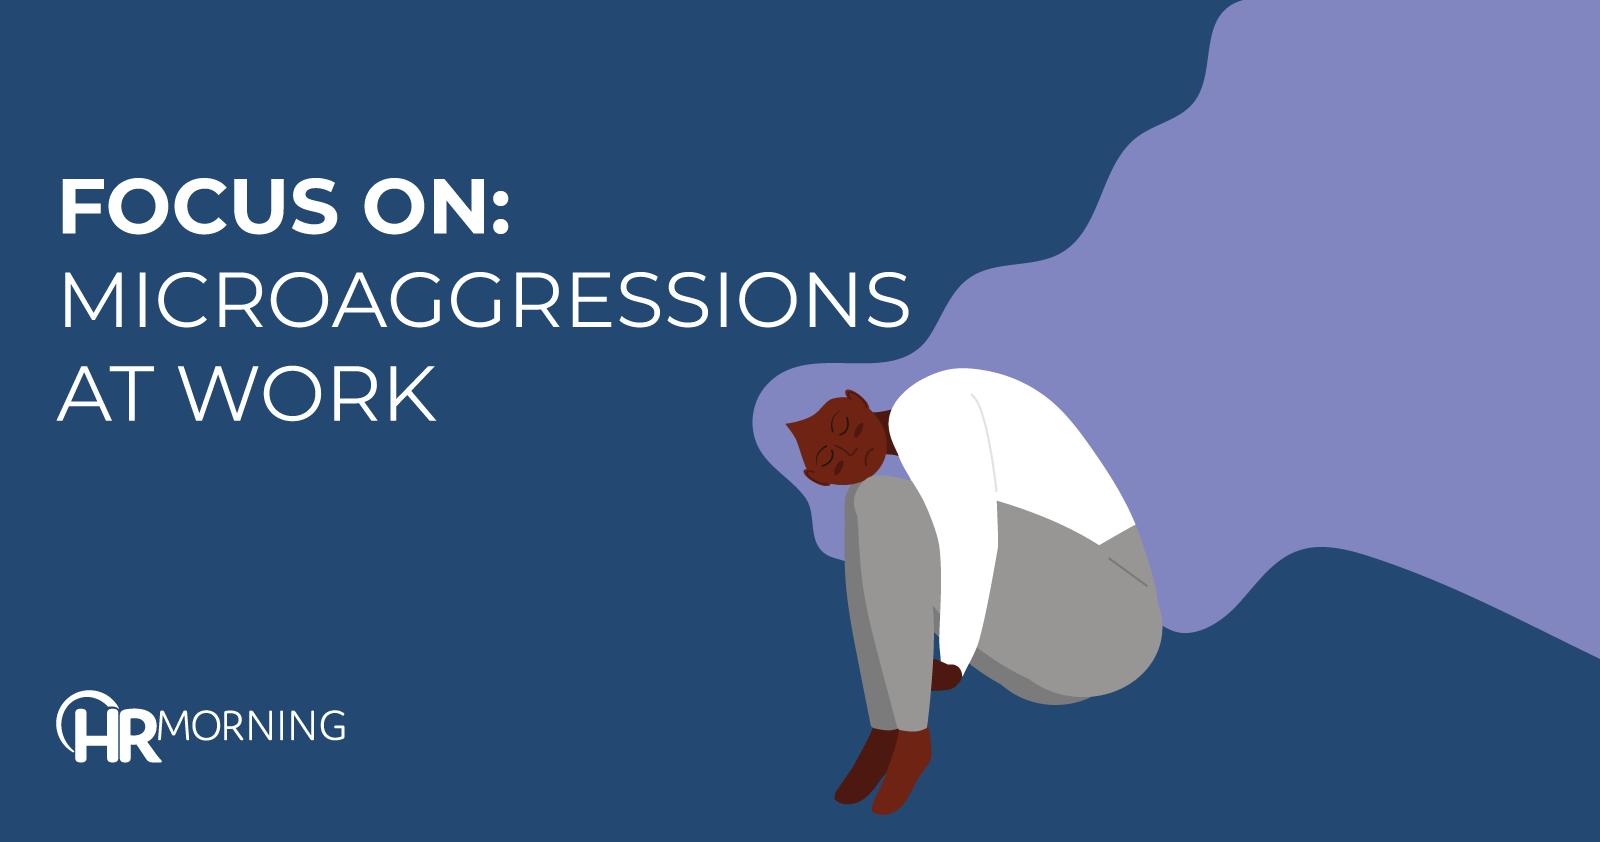 Focus on: Microaggressions at work